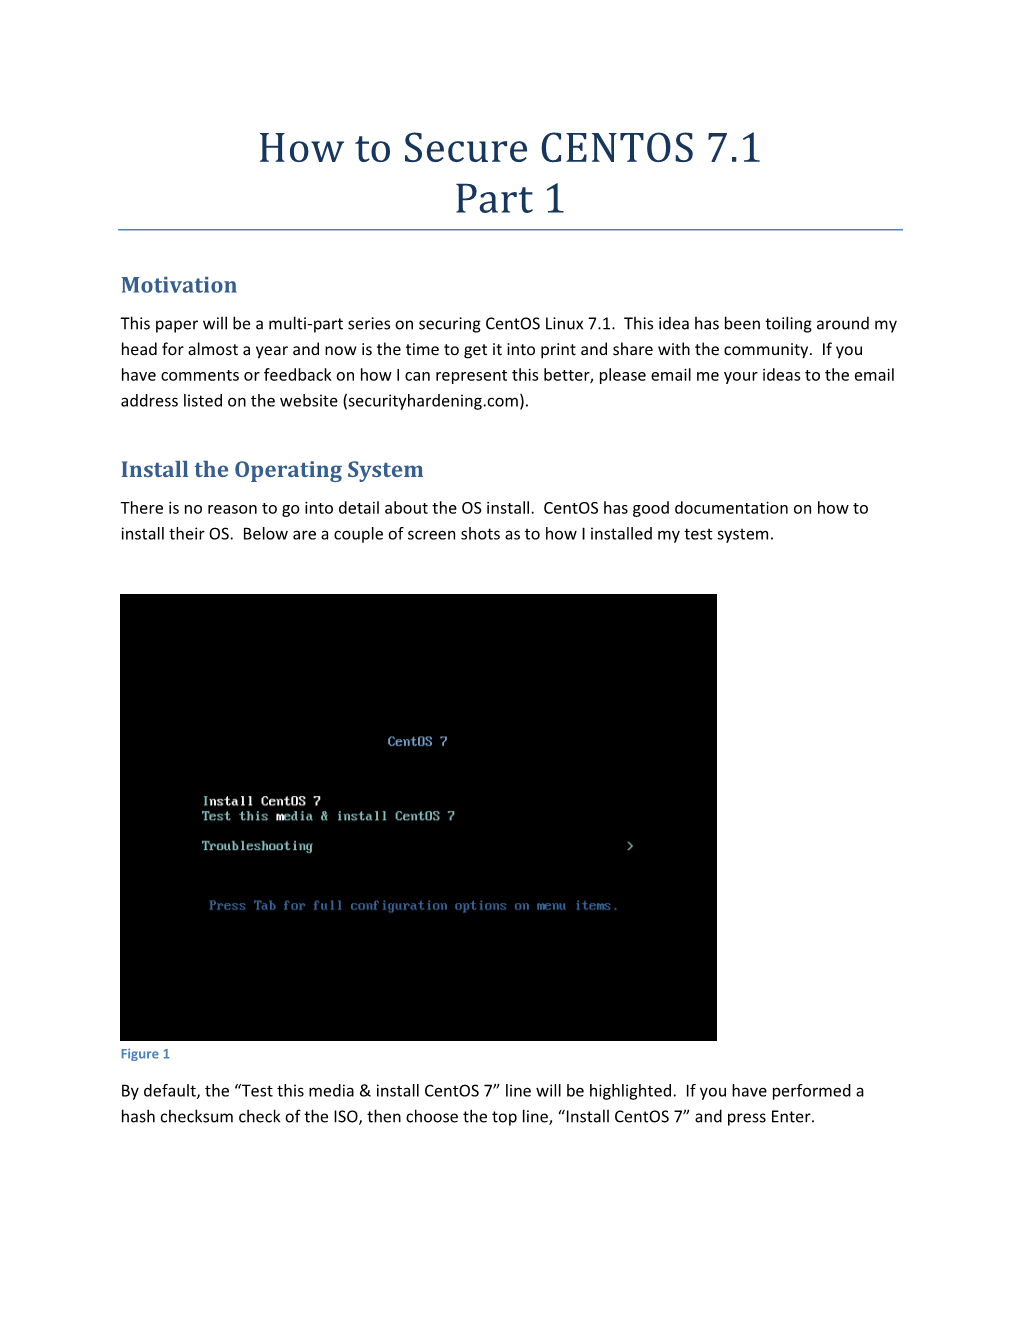 How to Secure CENTOS 7.1 Part 1